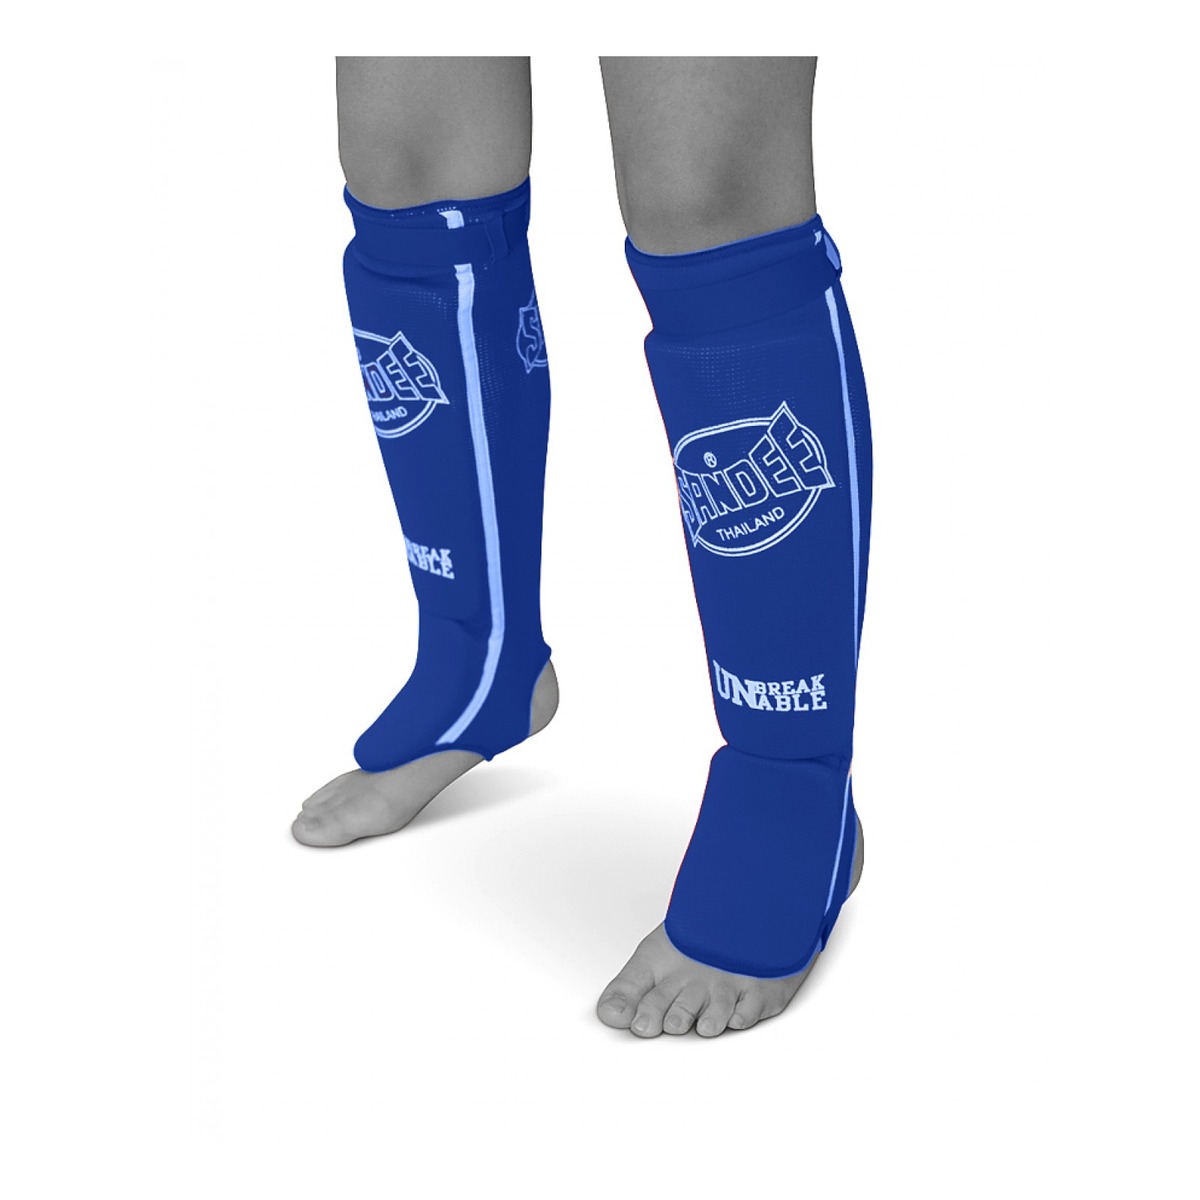 Sandee Competition Muay Thai Cotton Shin Pads - Blue - Click Image to Close